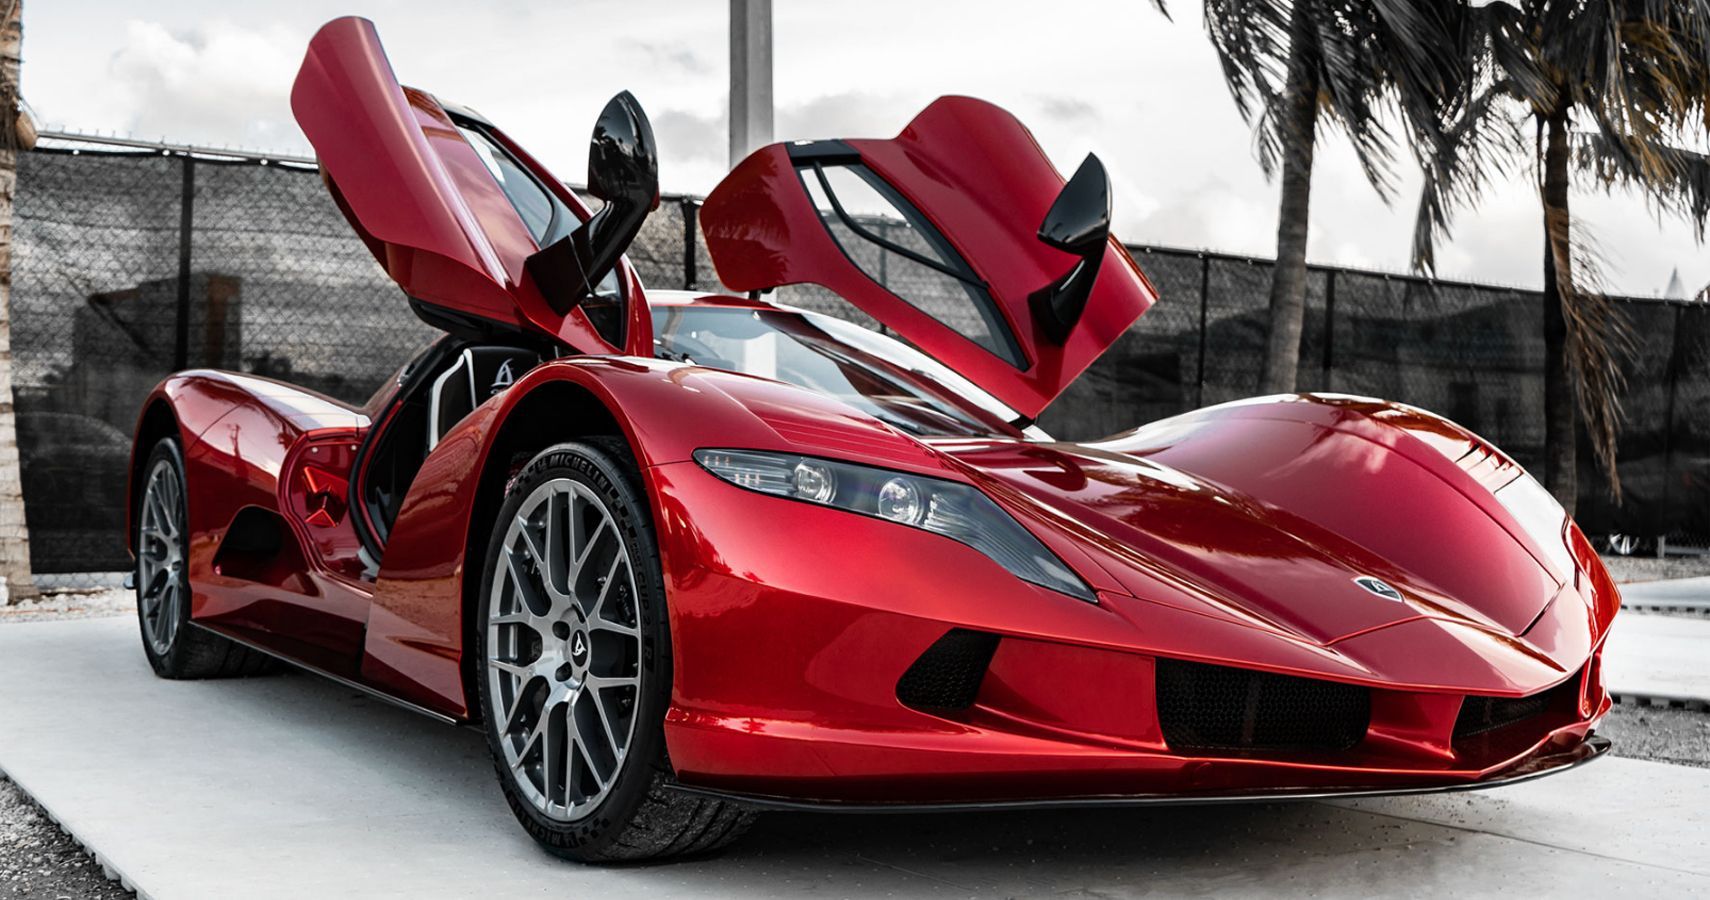 Aspark-hypercar-The-Owl-parked-with-gullwing-doors-open